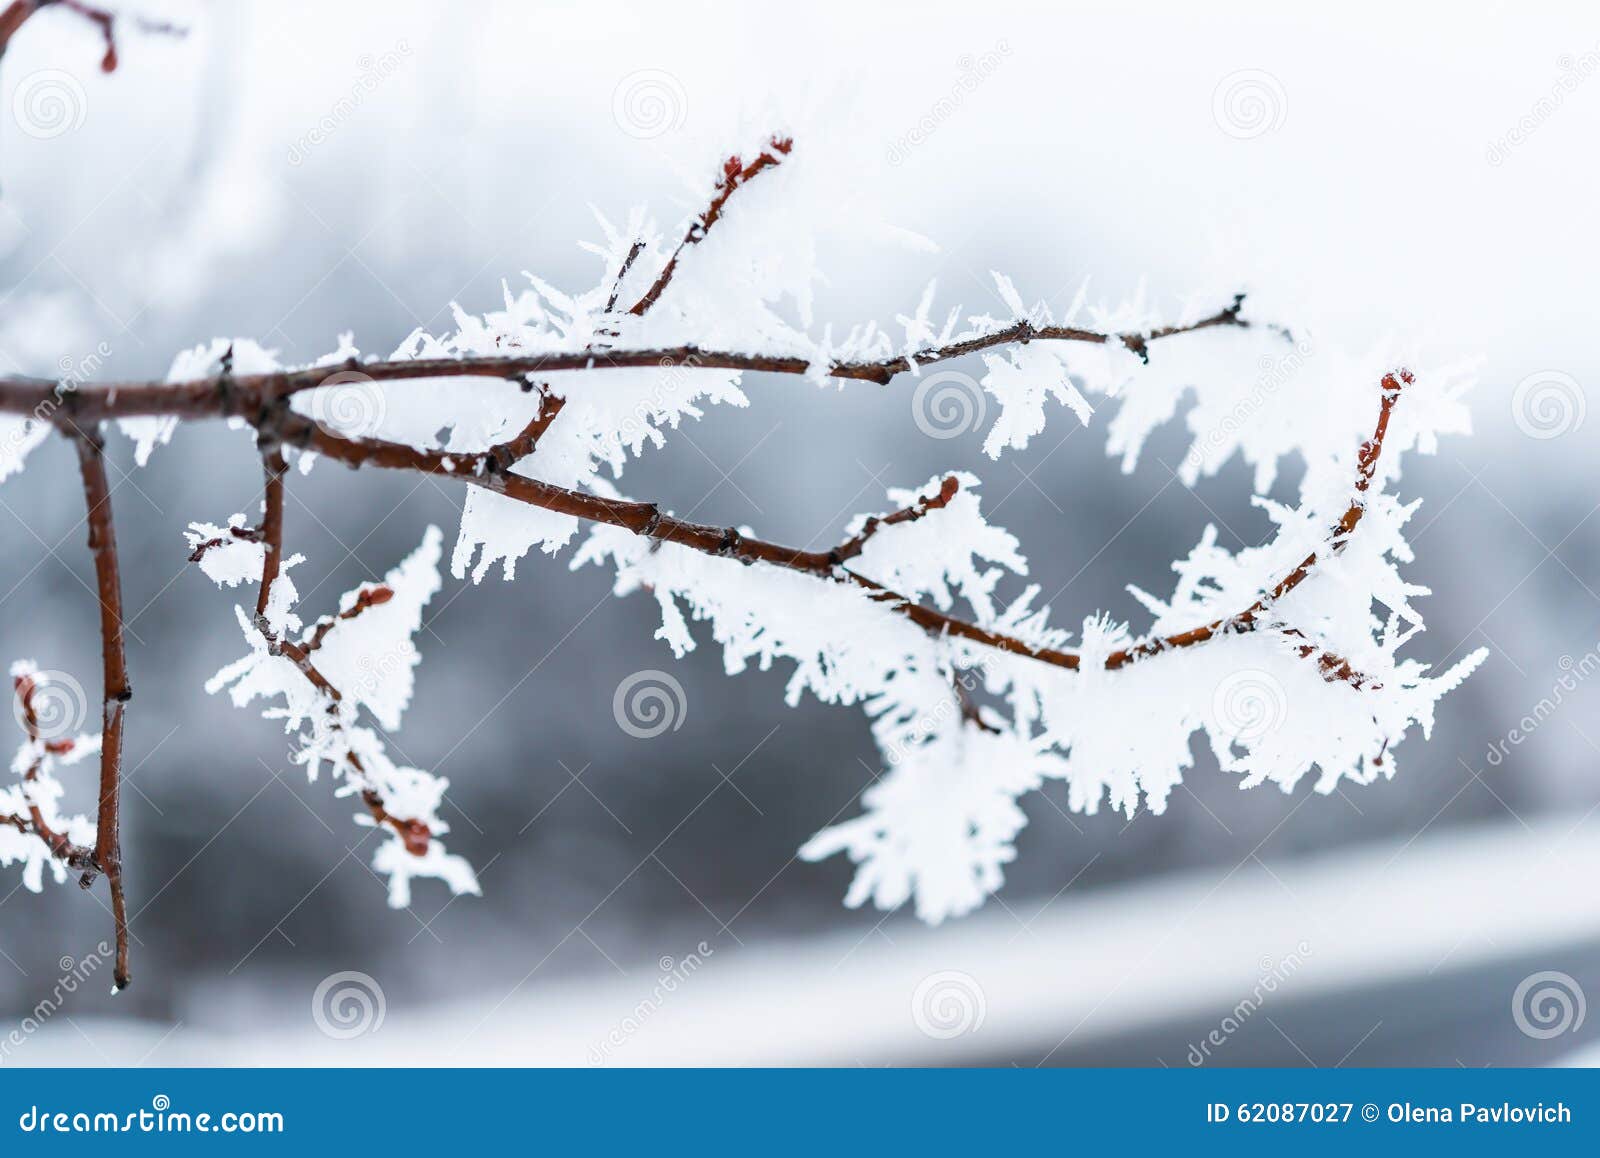 Ice Crystals On Tree Branches. Stock Image - Image of white, covered ...